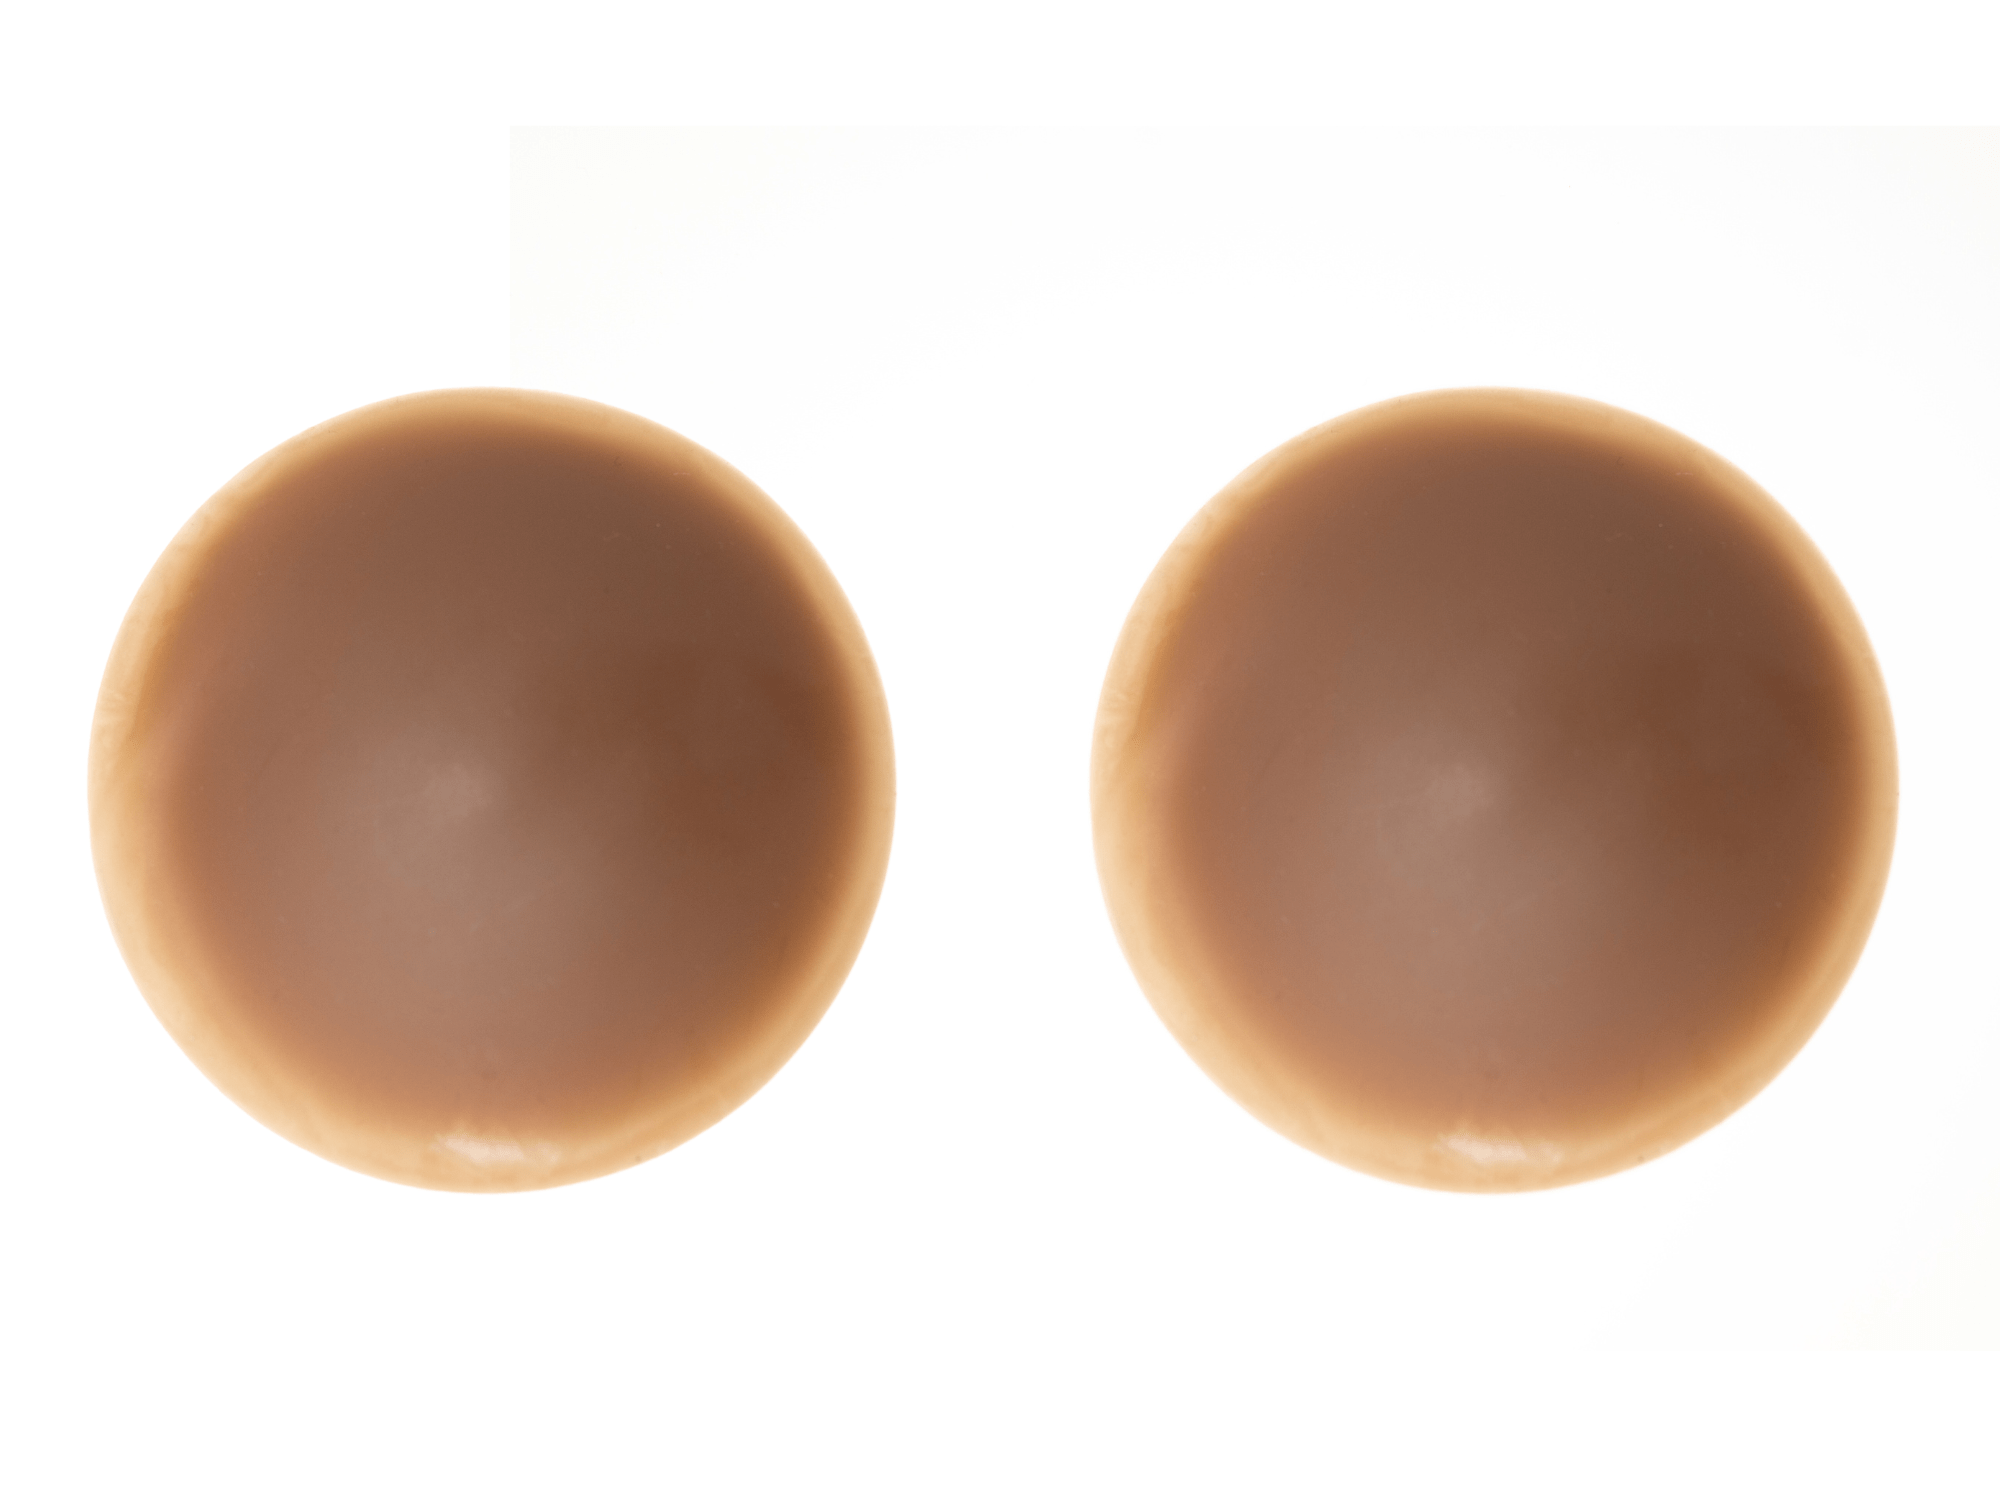 A pair of silicone nipple pasties for dark skin women.